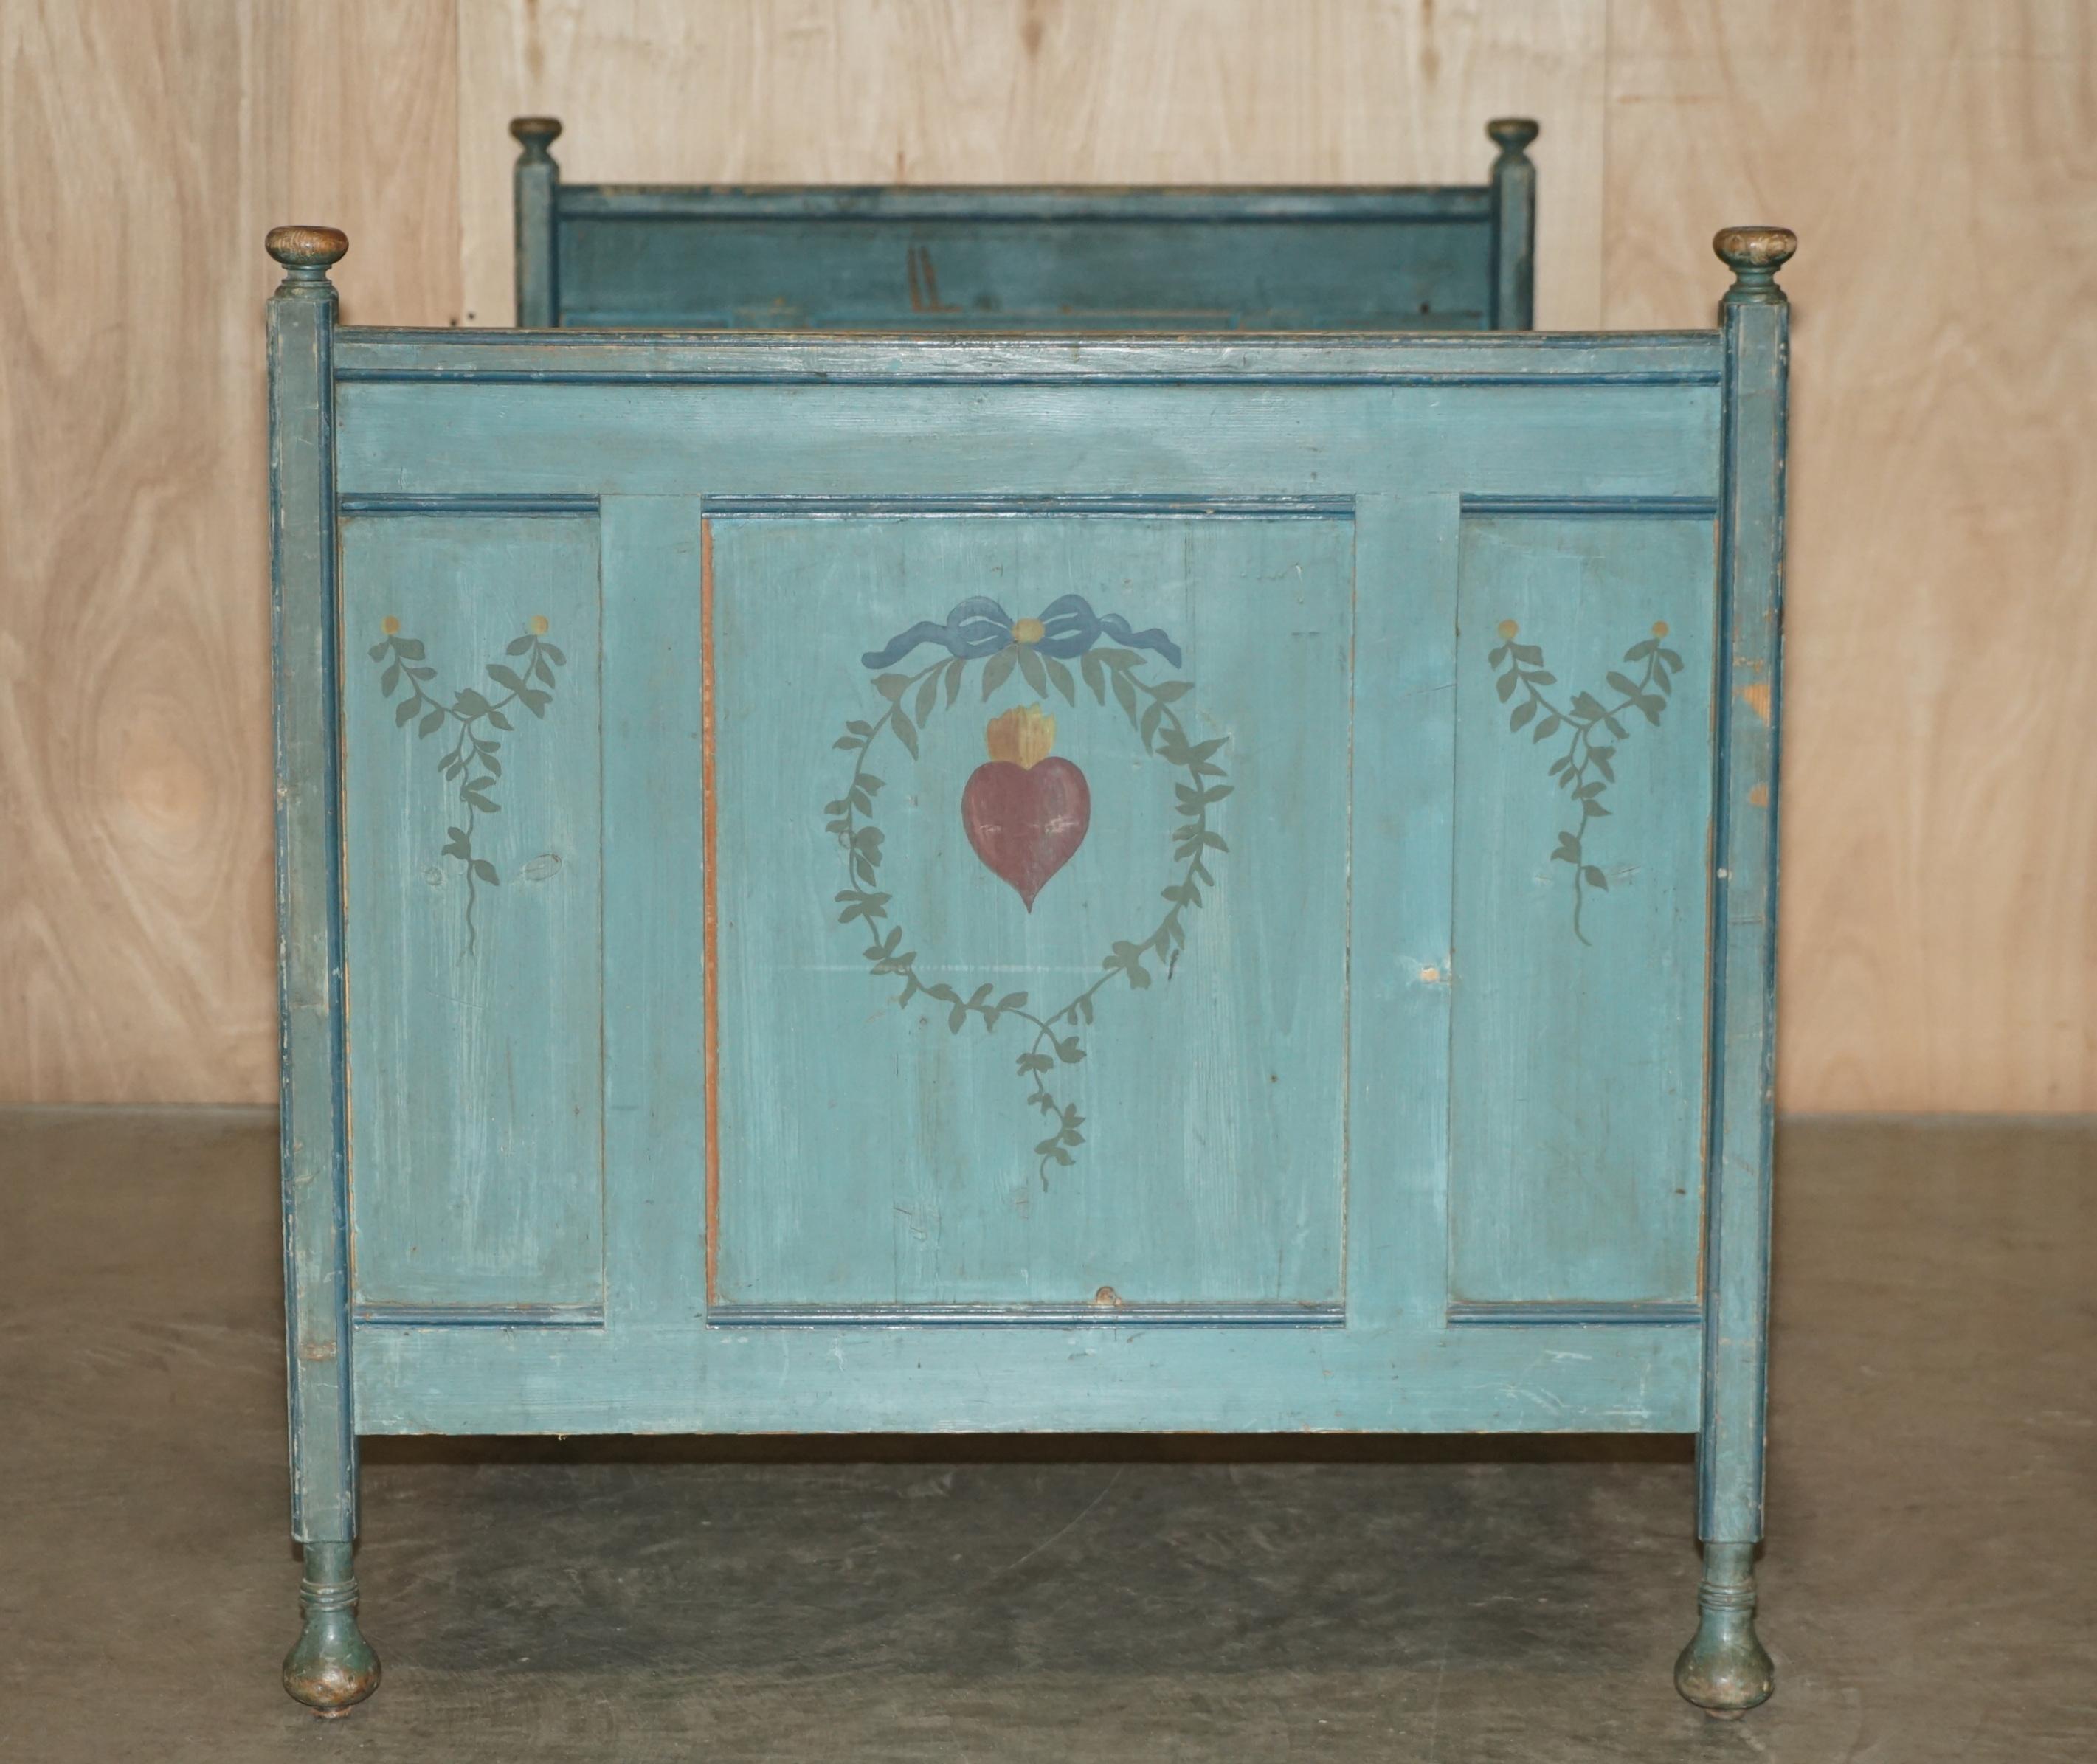 Royal House Antiques

Royal House Antiques is delighted to offer for sale this sublime quality, antique French Duck Egg Blue hand painted Napoleon II style bed frame 

Please note the delivery fee listed is just a guide, it covers within the M25